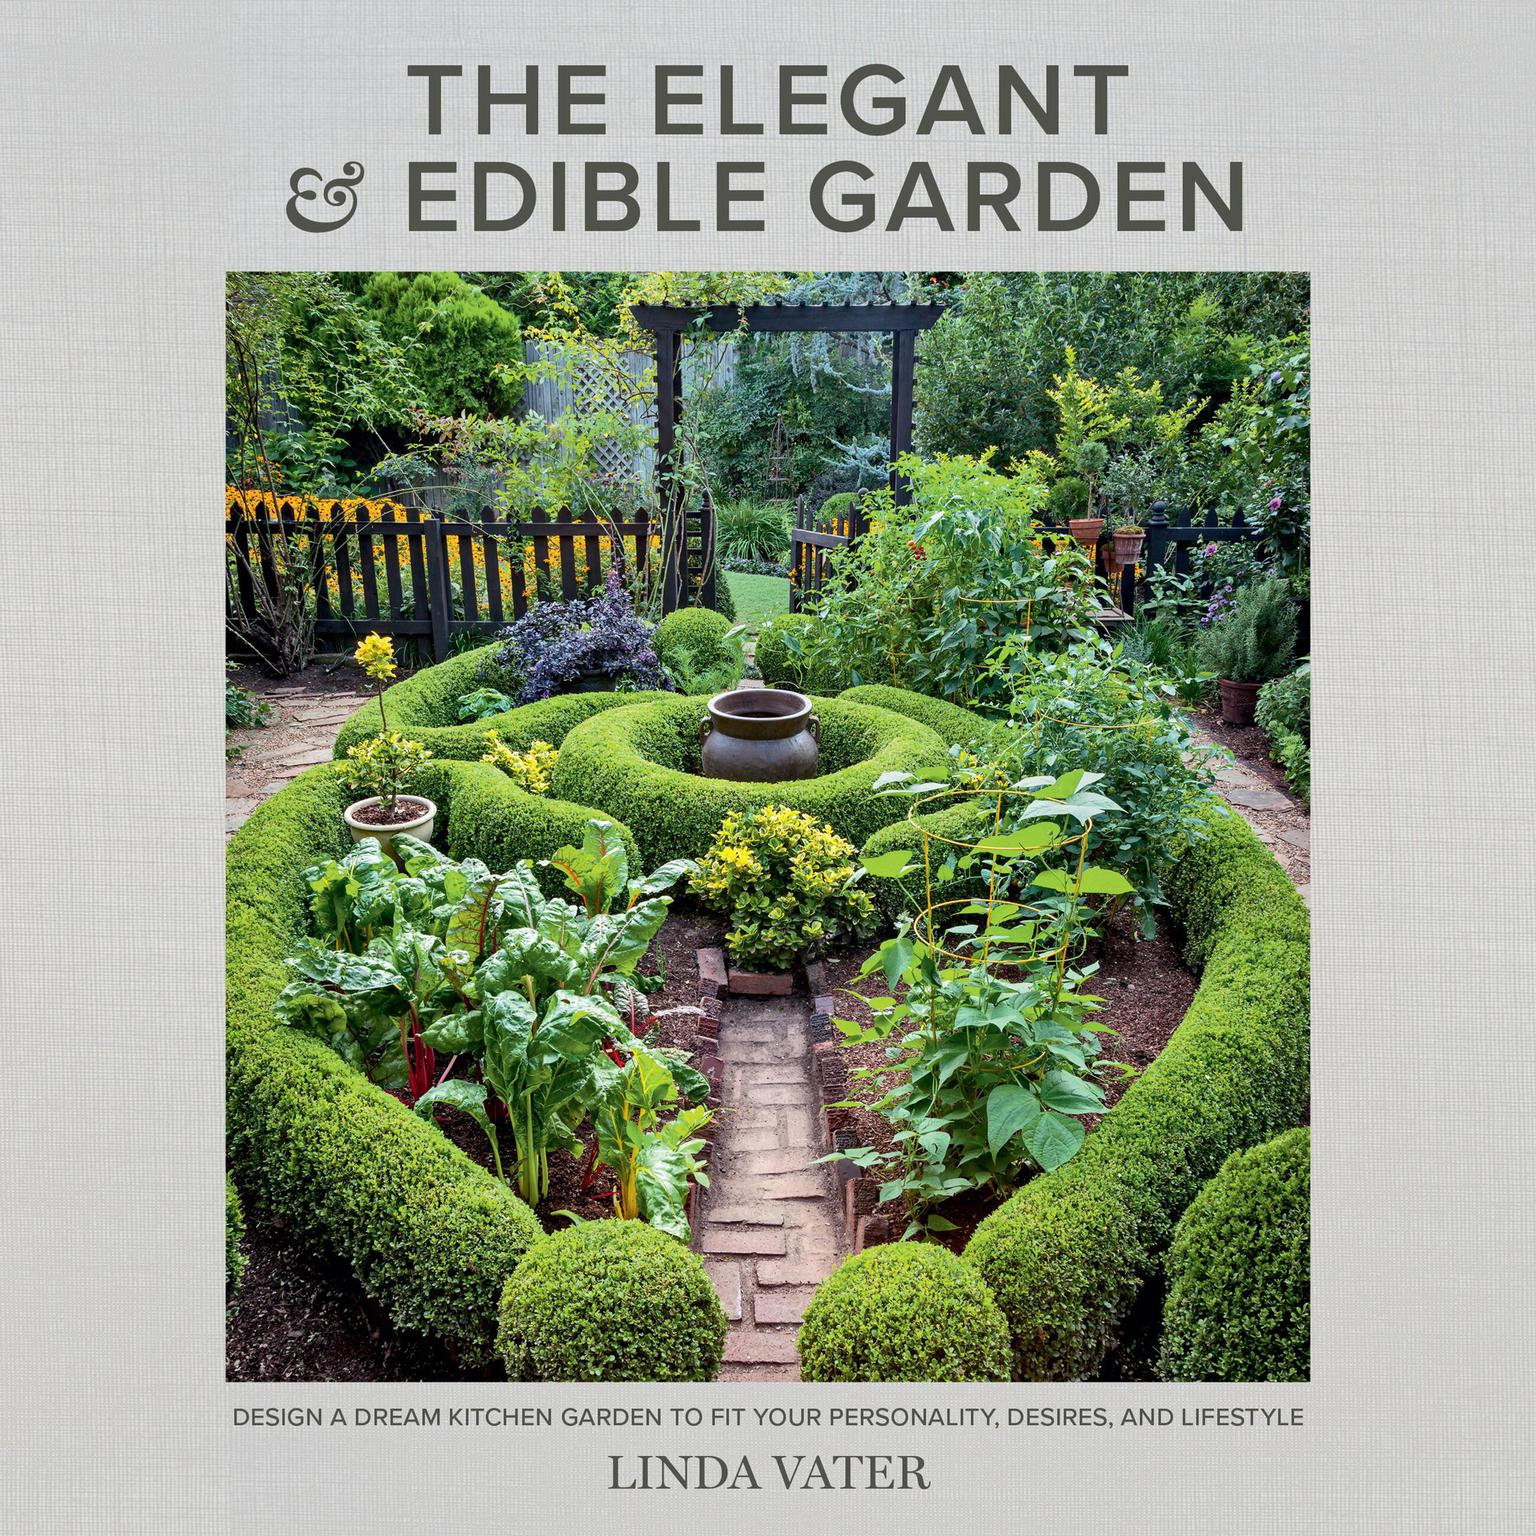 The Elegant and Edible Garden: Design a Dream Kitchen Garden to Fit Your Personality, Desires, and Lifestyle Audiobook, by Linda Vater